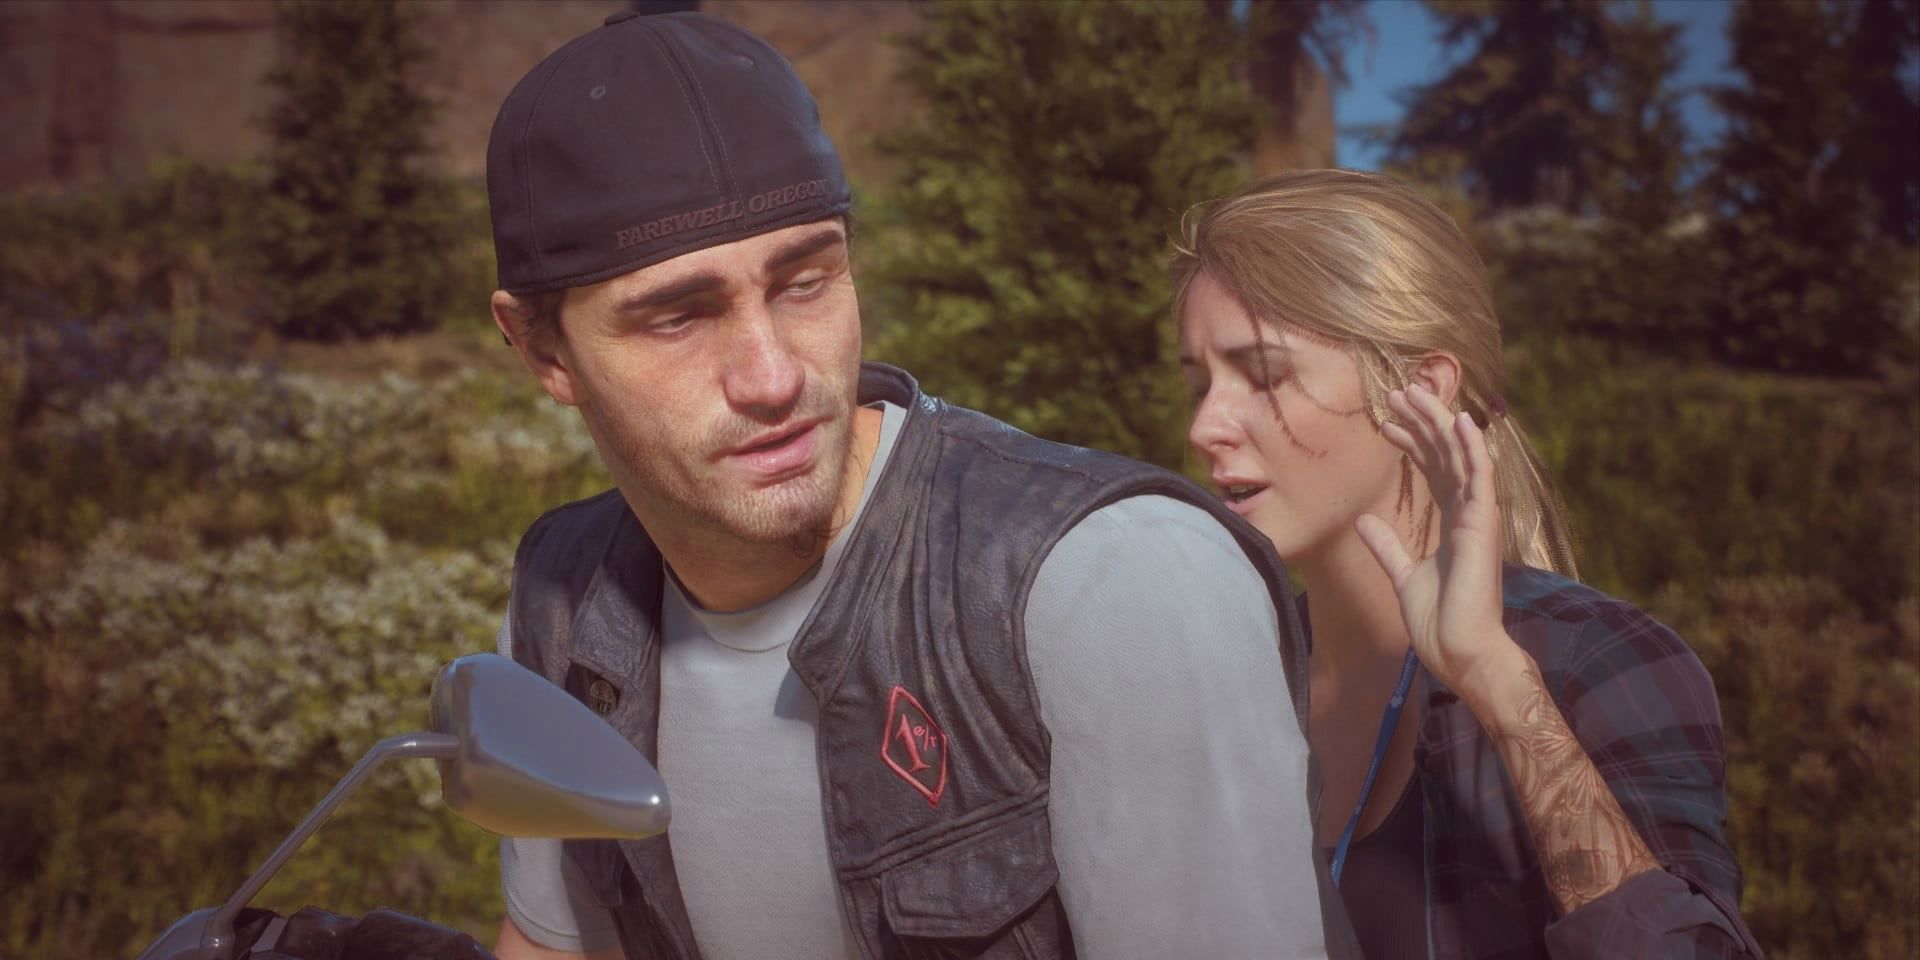 Days Gone Ending Twist Completely Ruins All The Character Development